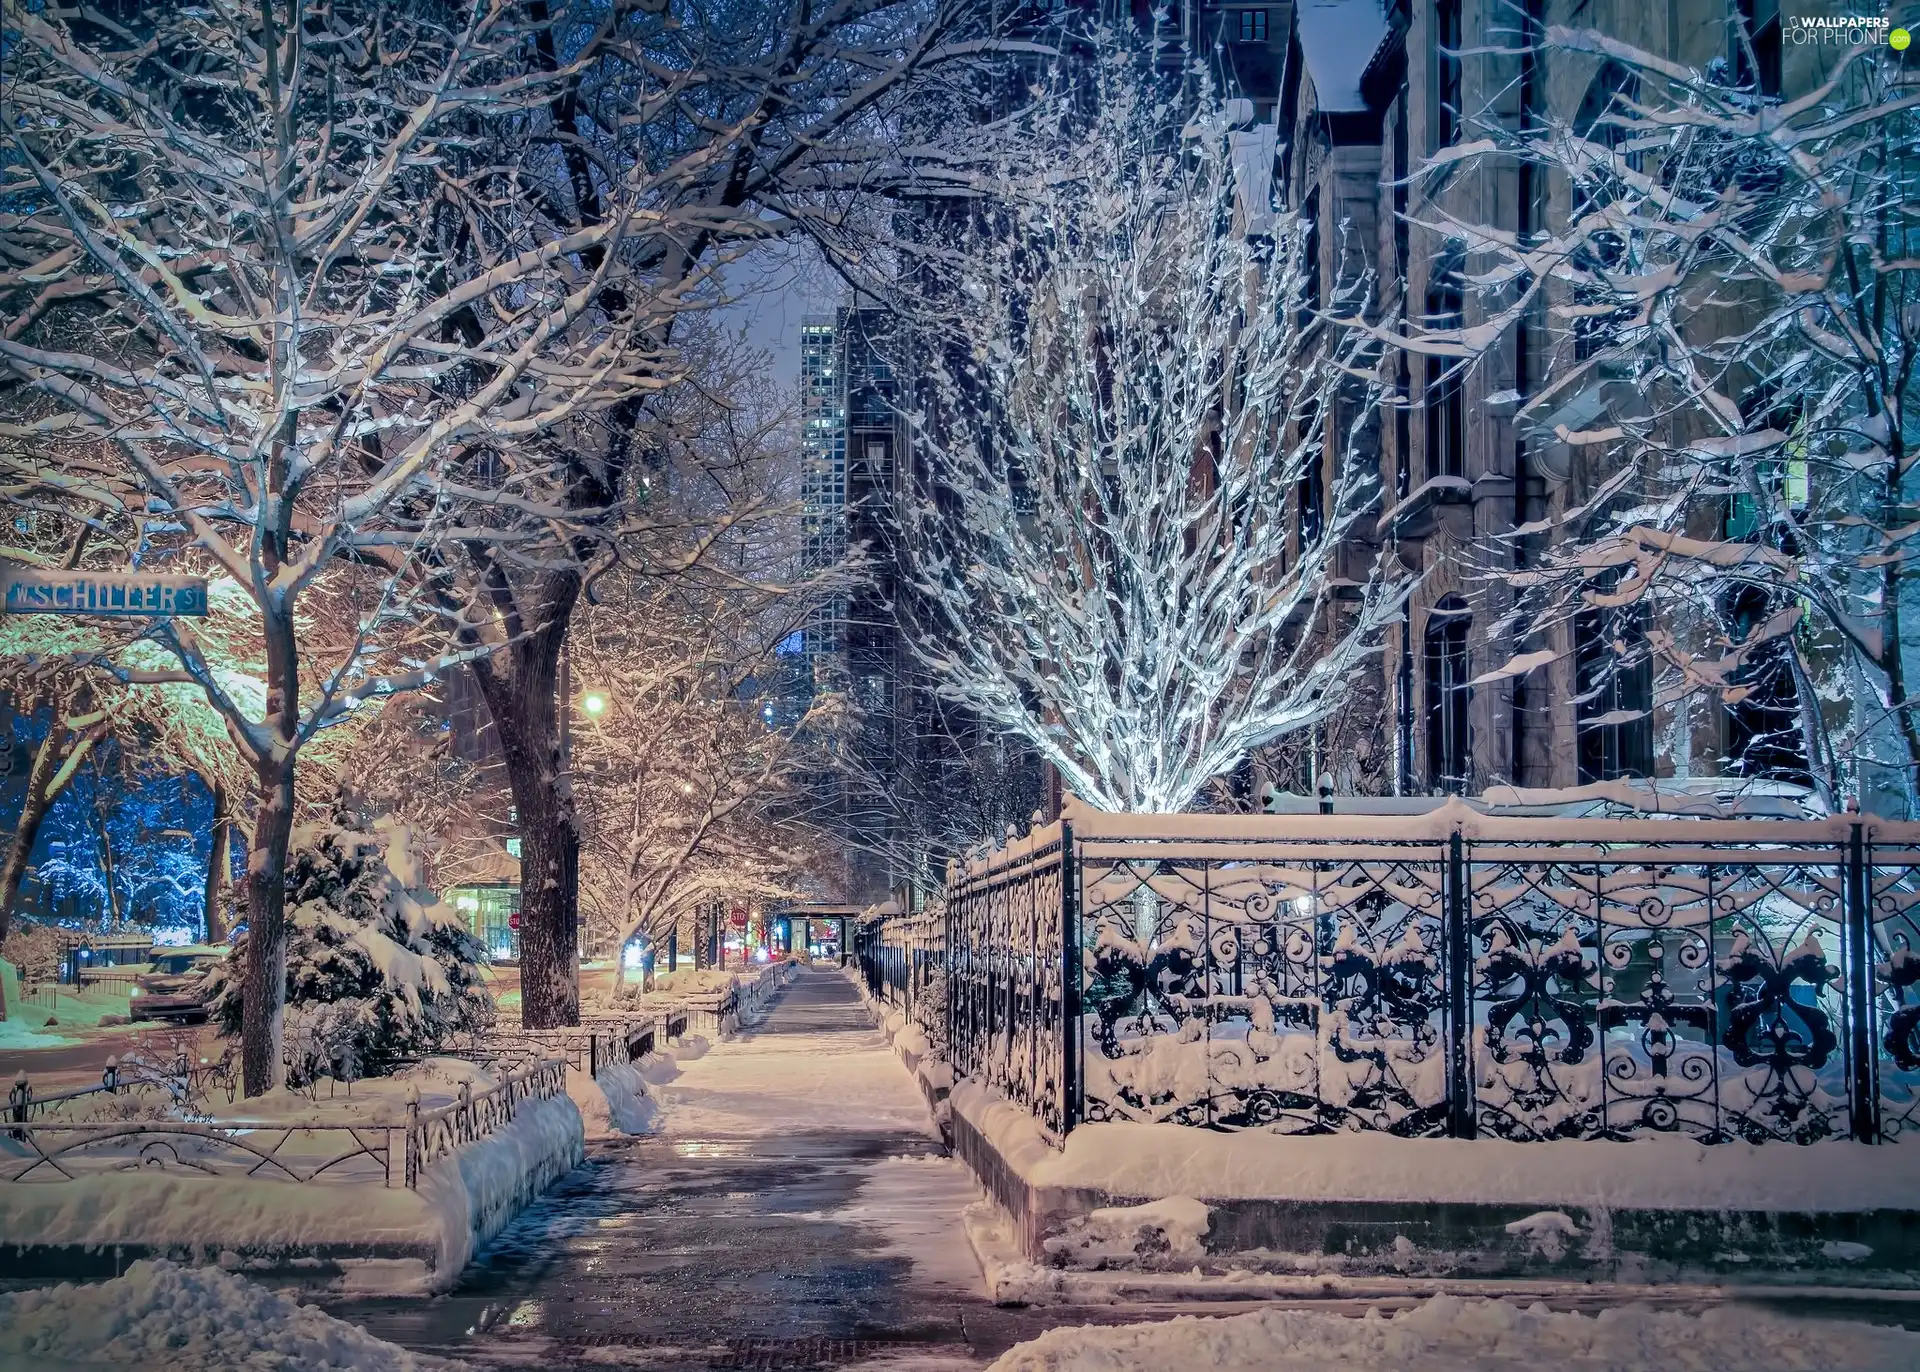 The United States, Chicago, Street, winter, viewes, Fance, Snowy, trees, snow